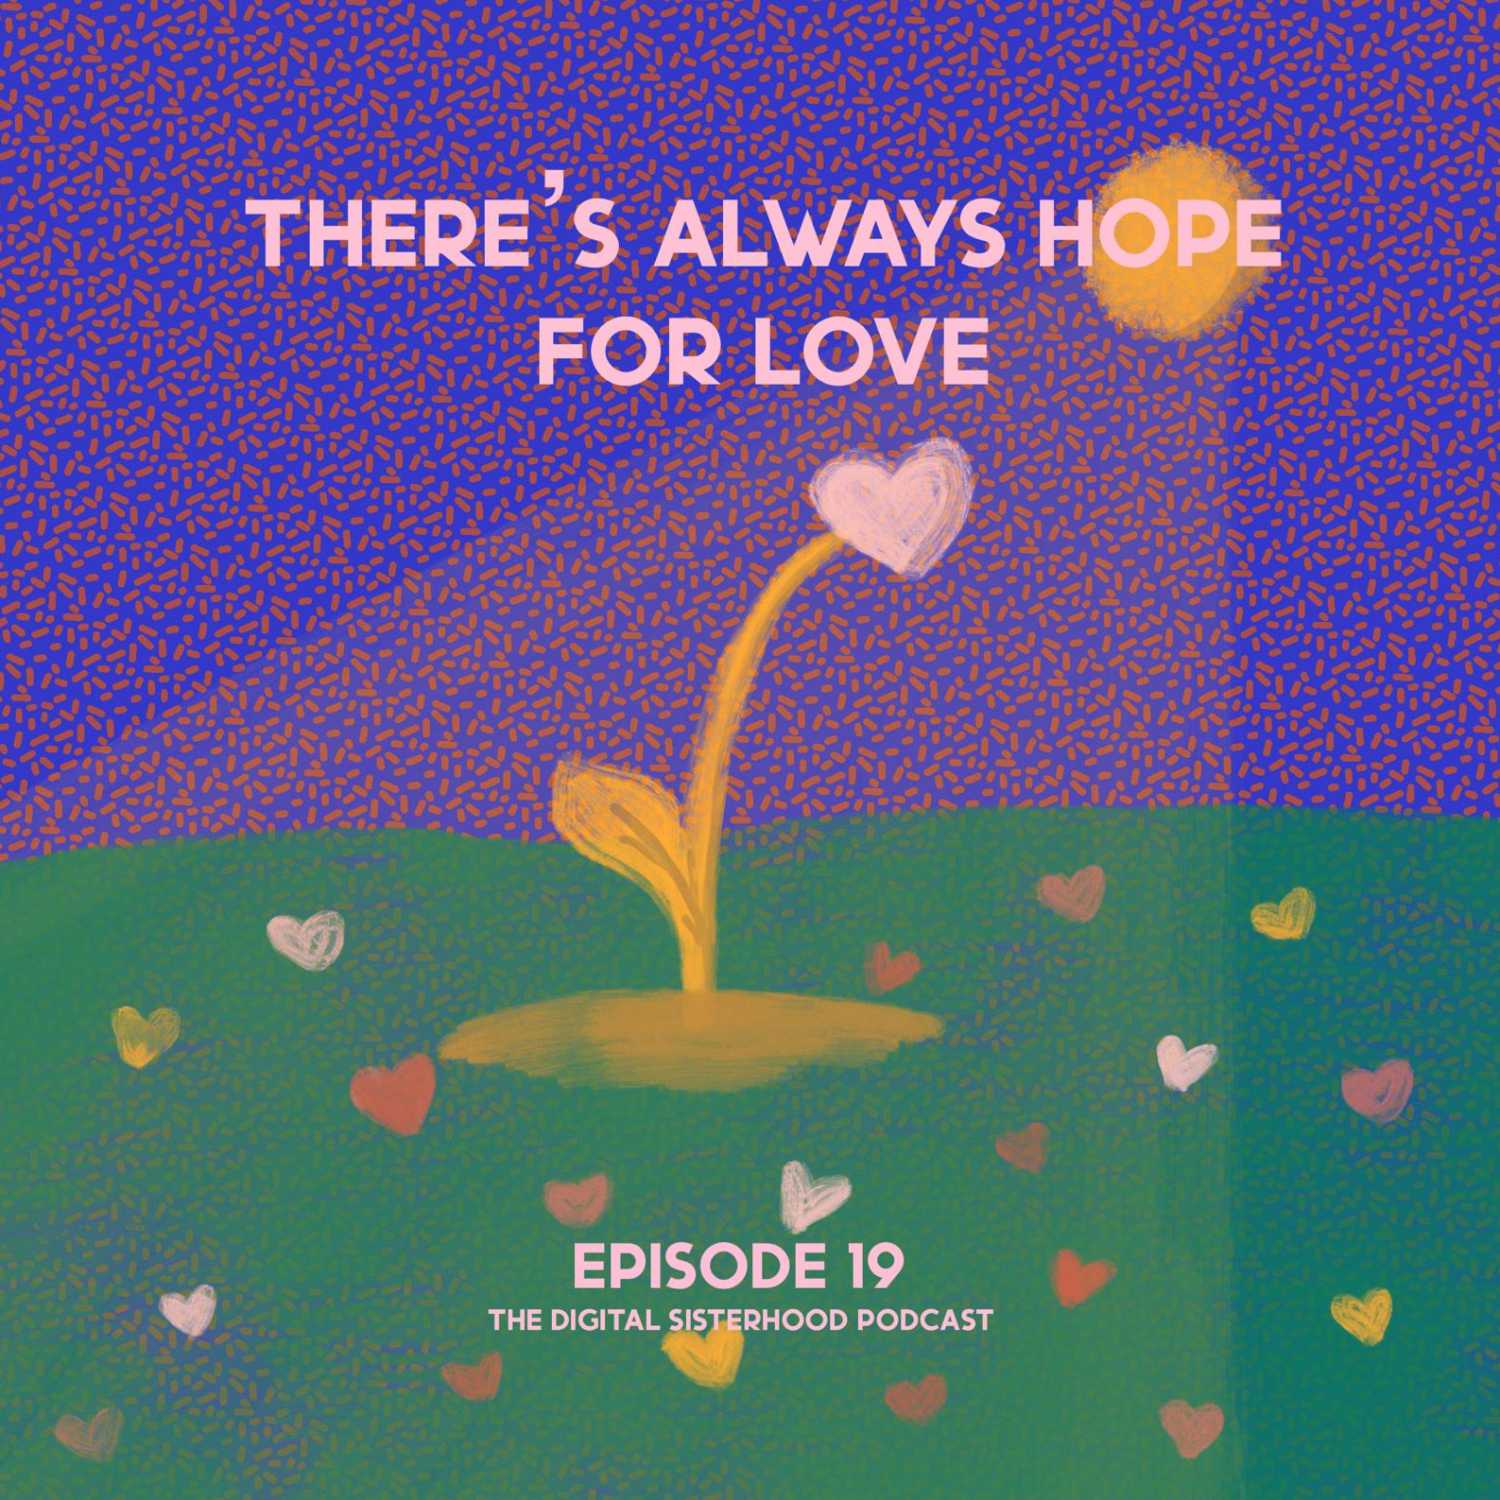 Episode Nineteen: There's Always Hope For Love